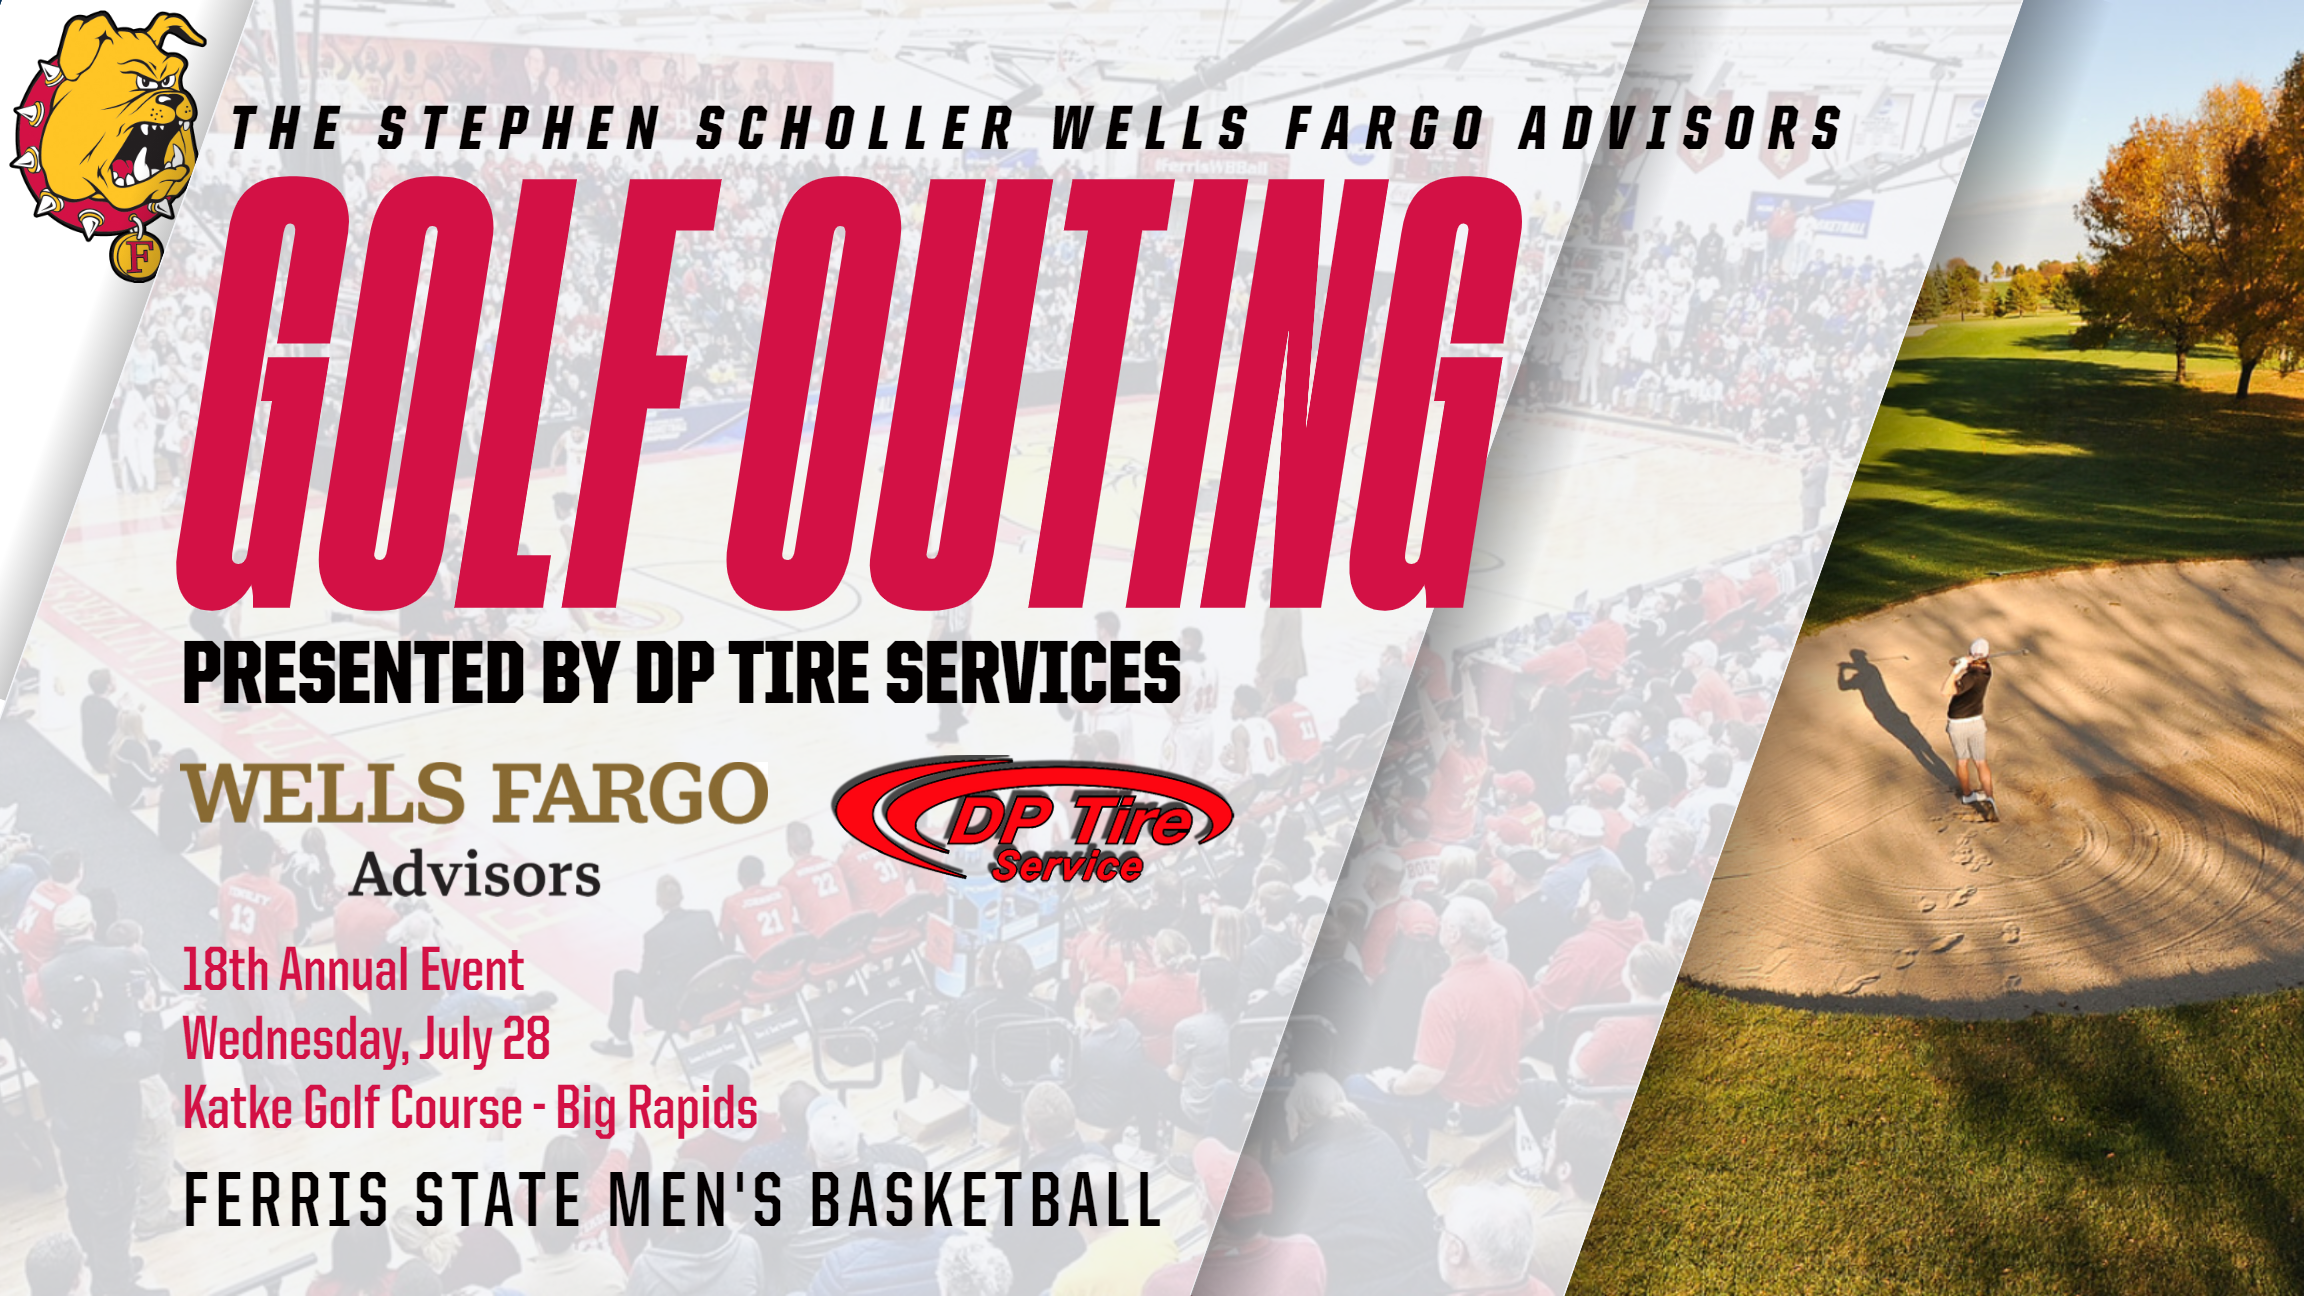 Ferris State Men's Basketball Announces Key Sponsorships For Annual Golf Outing